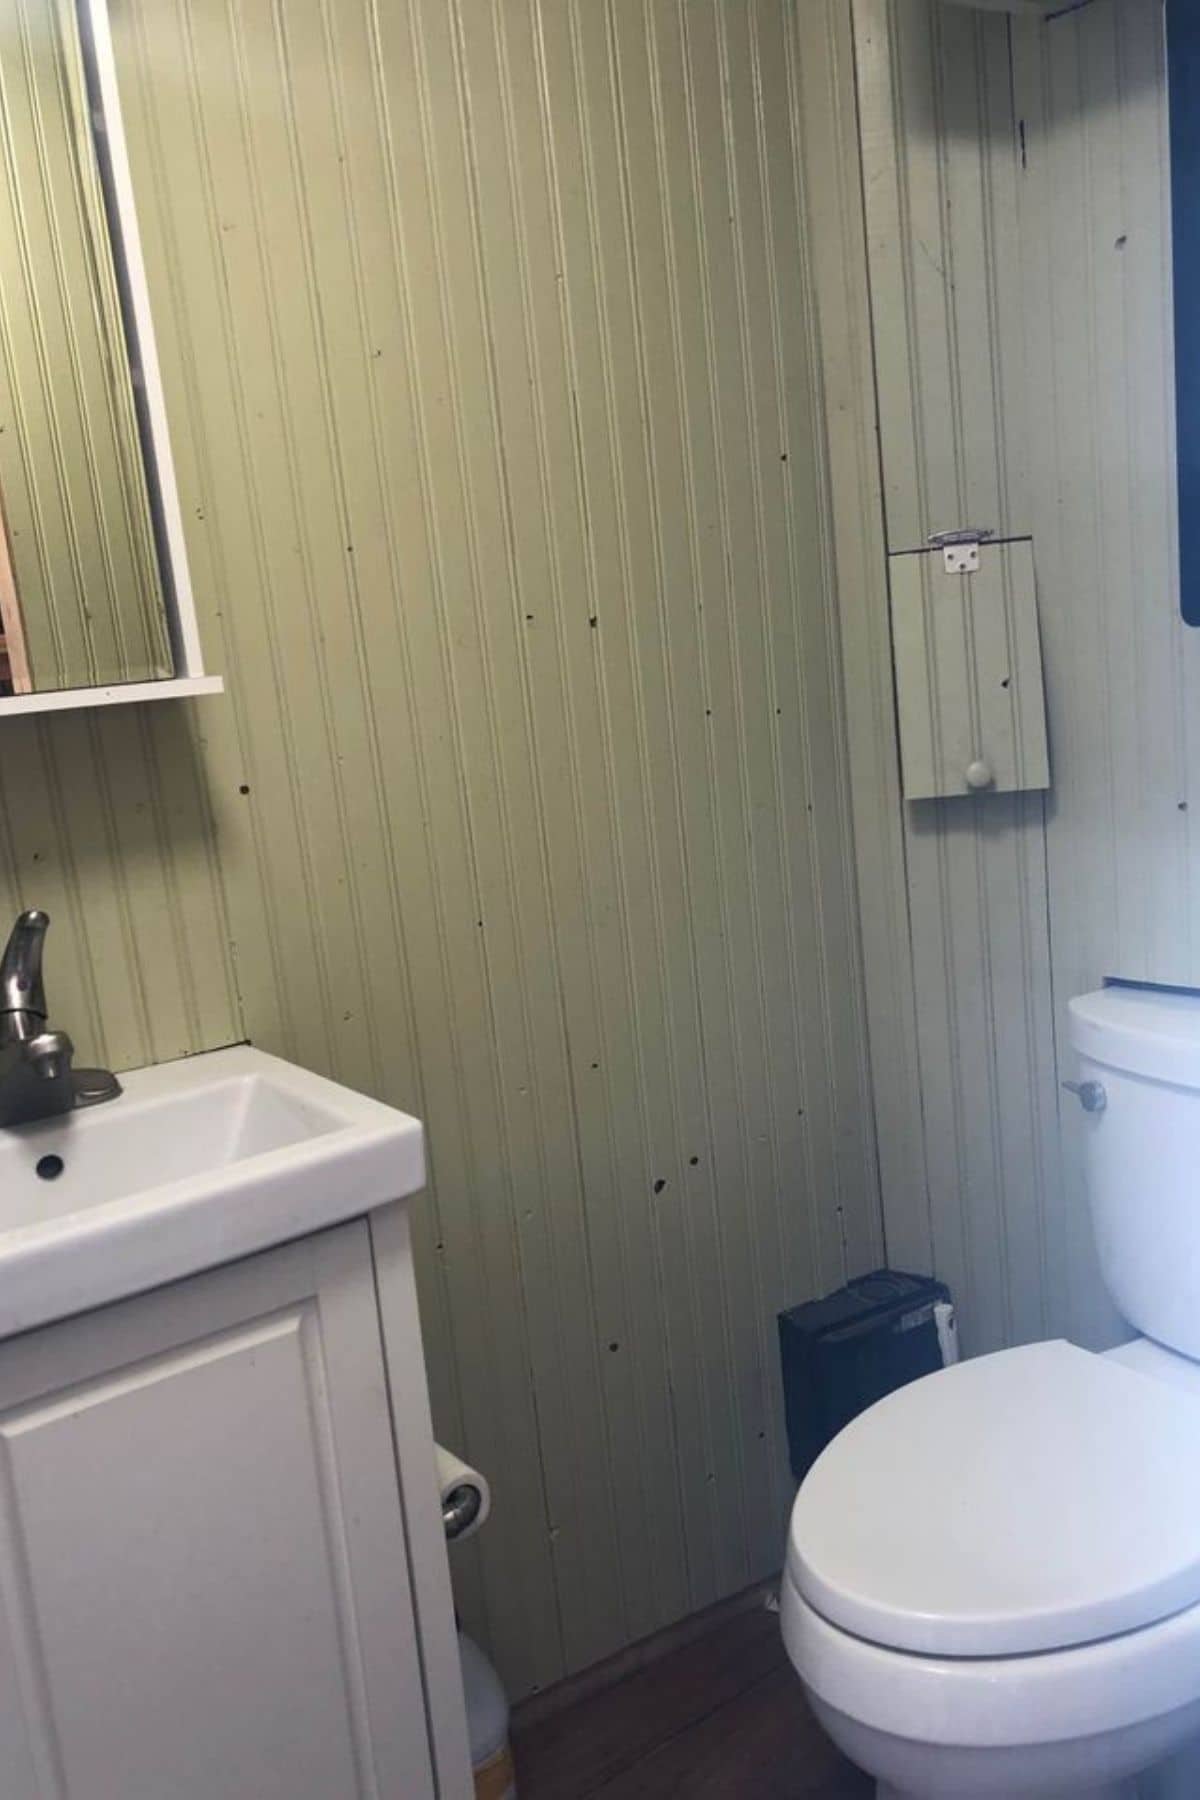 White flush toilet in bathroom with green walls and white vanity